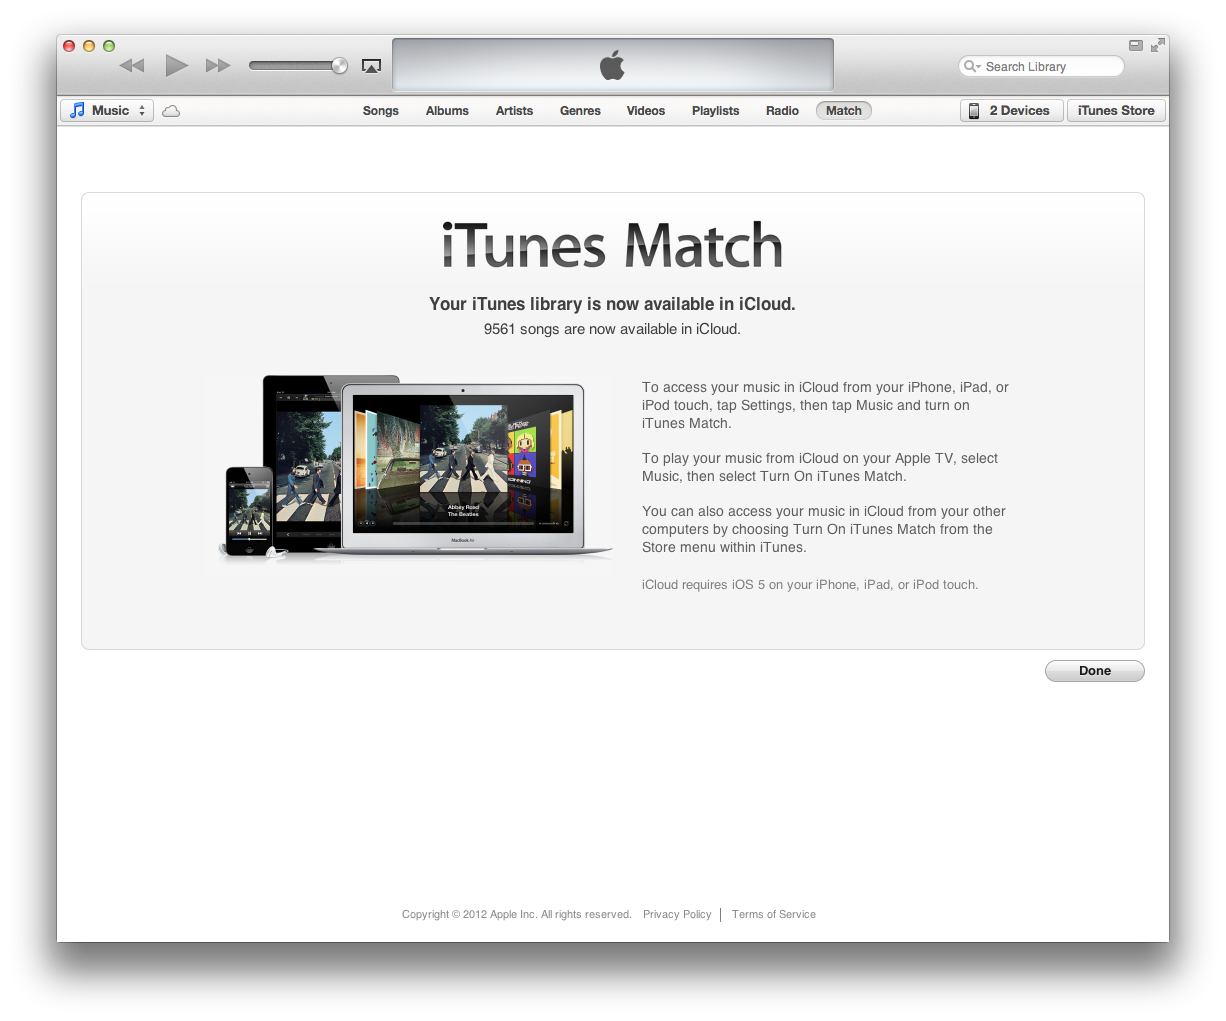 iTunes Store: Subscribing to iTunes Match